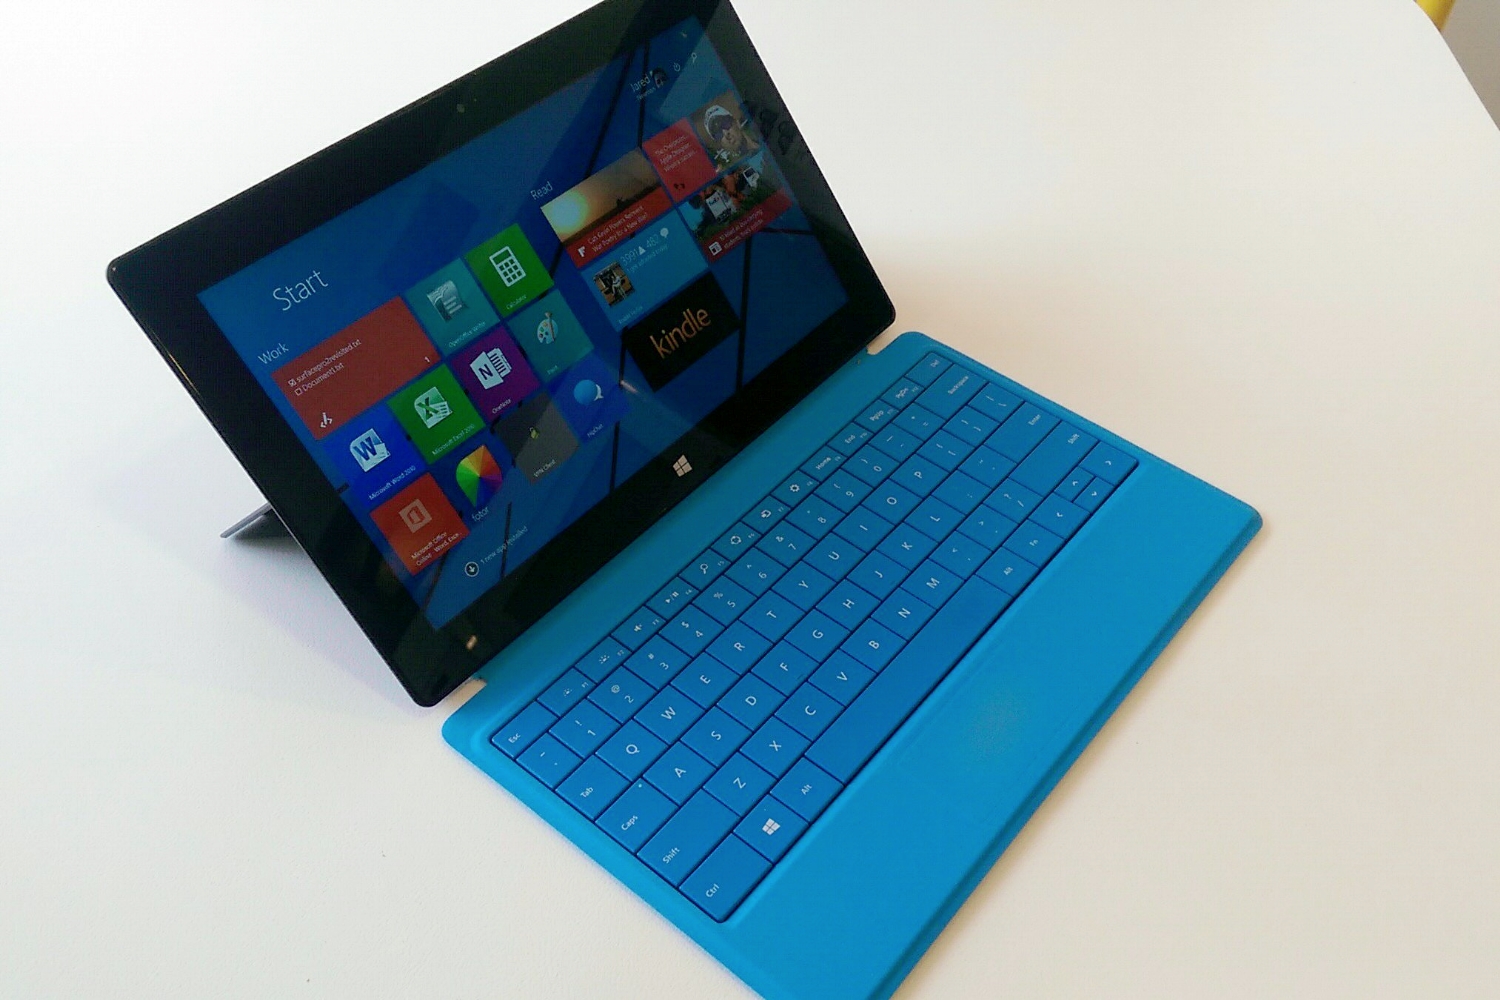 box for windows 8 review